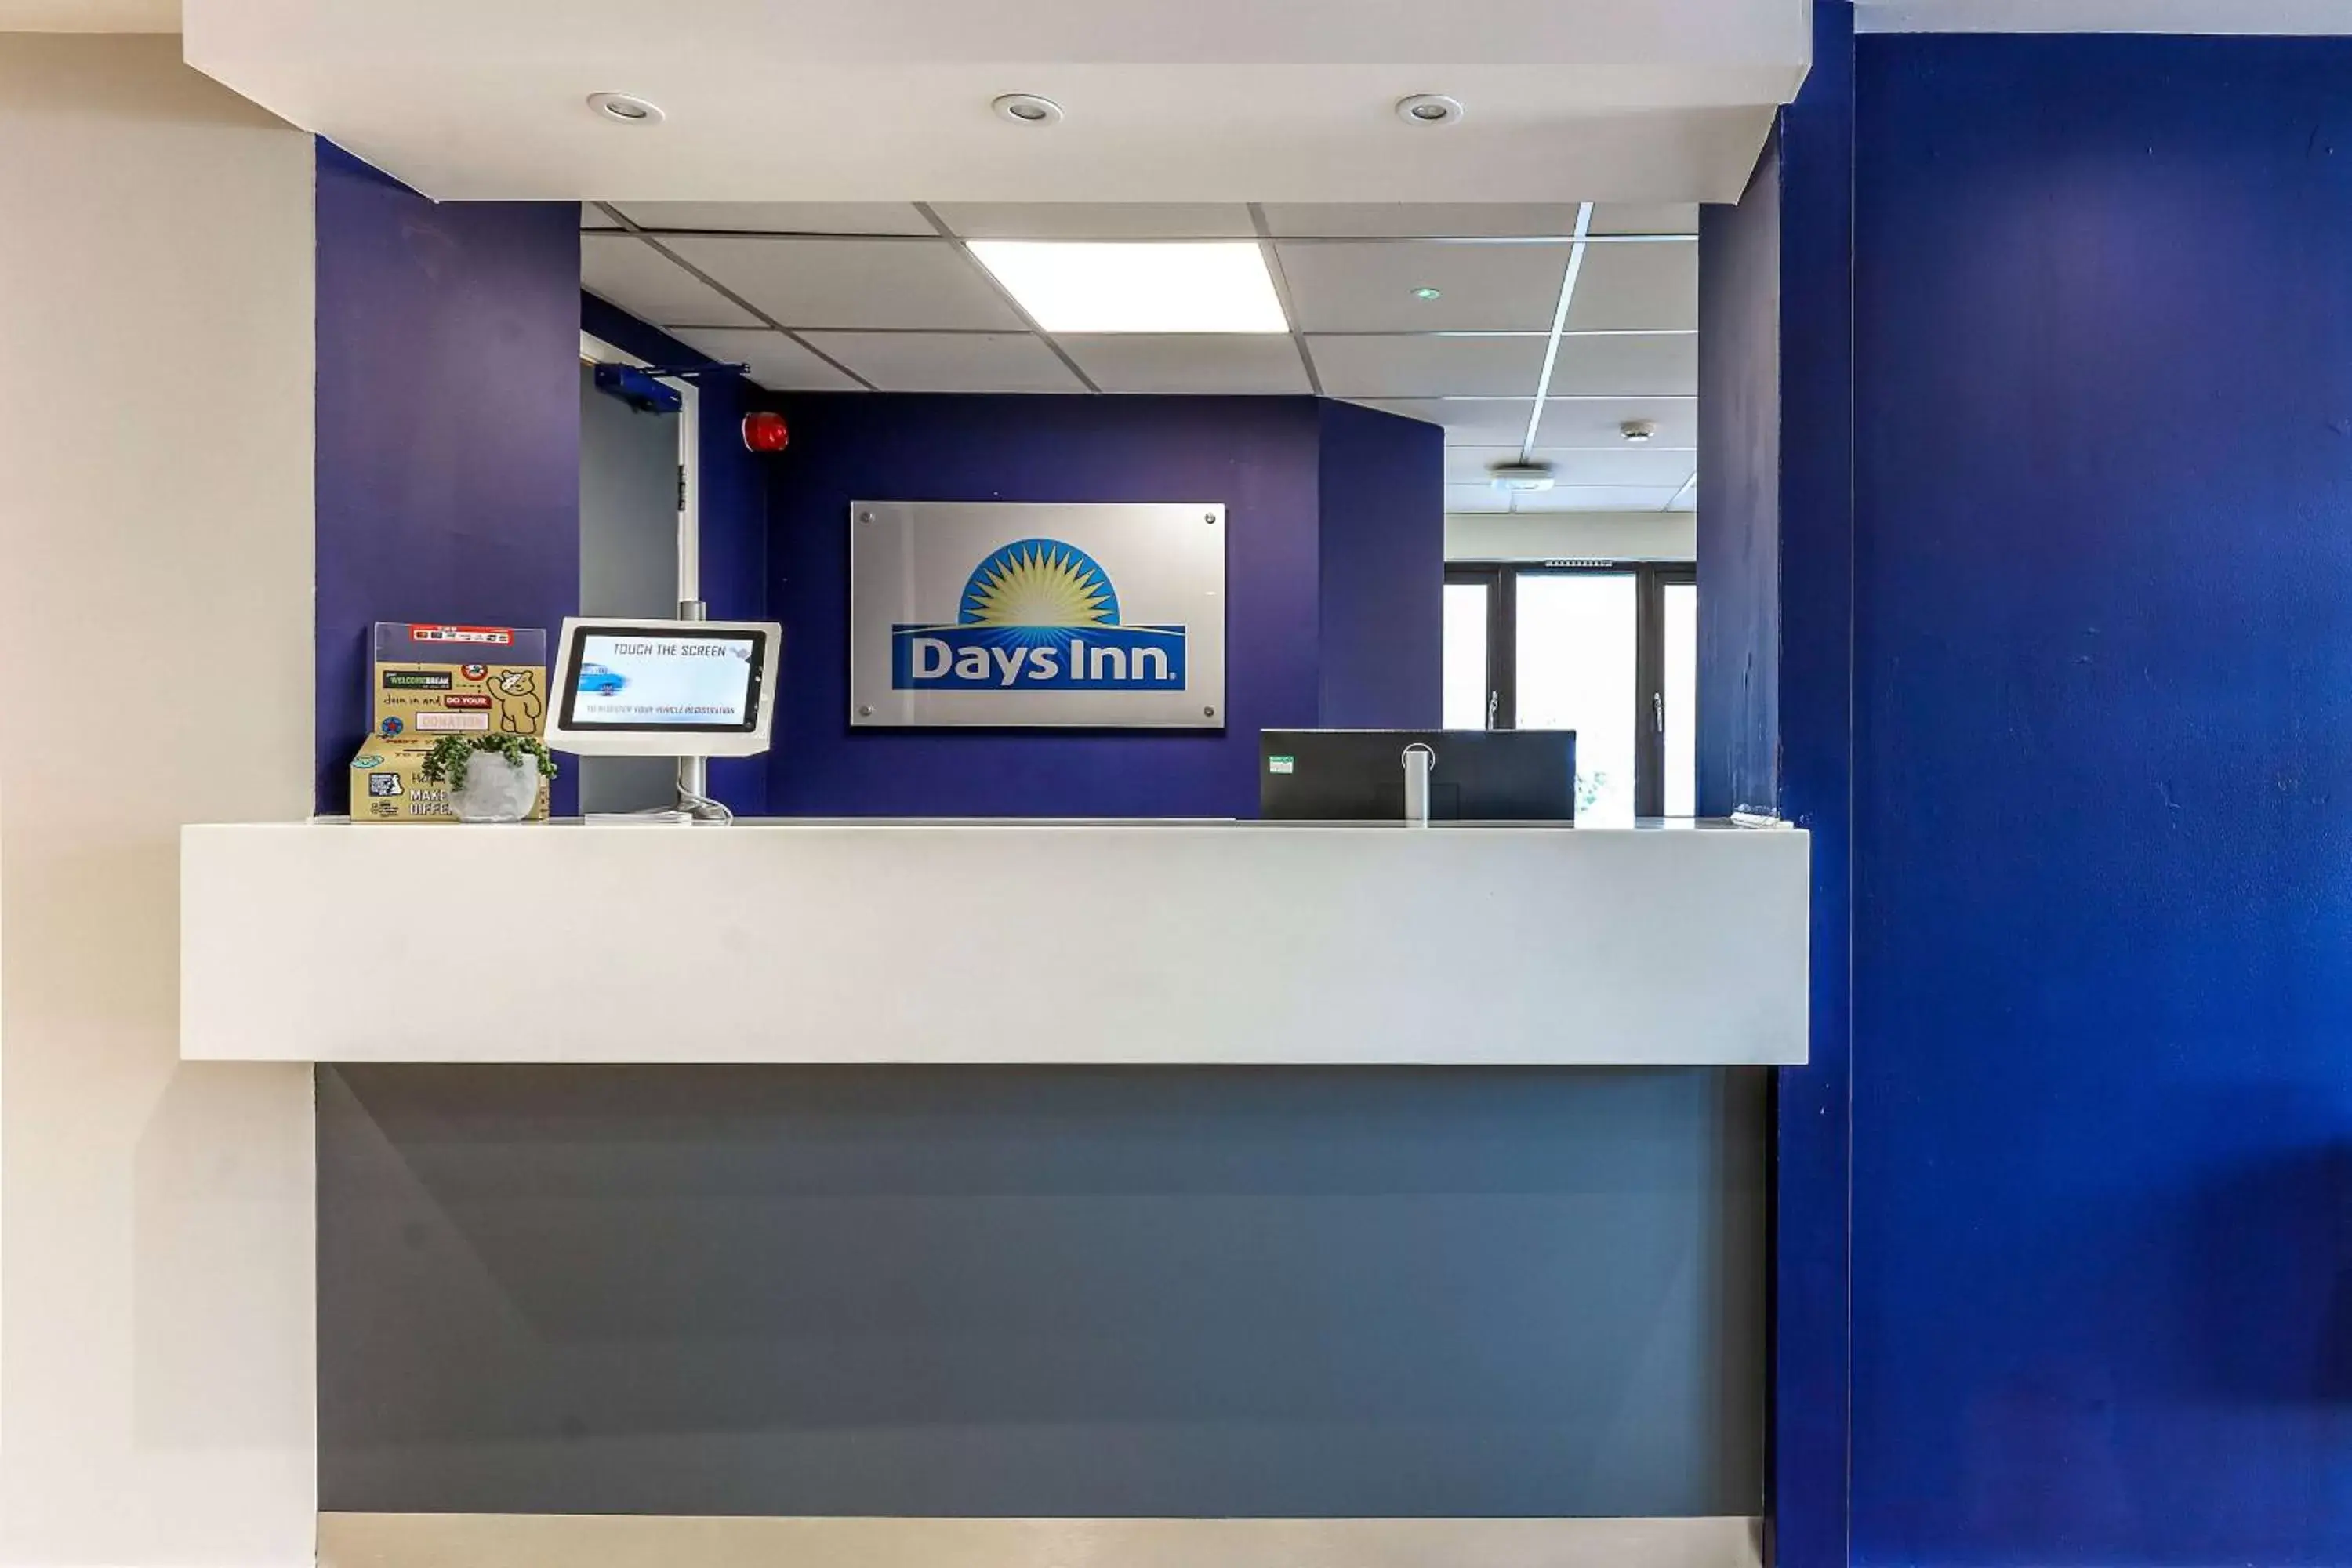 Property logo or sign, Lobby/Reception in Days Inn London Stansted Airport